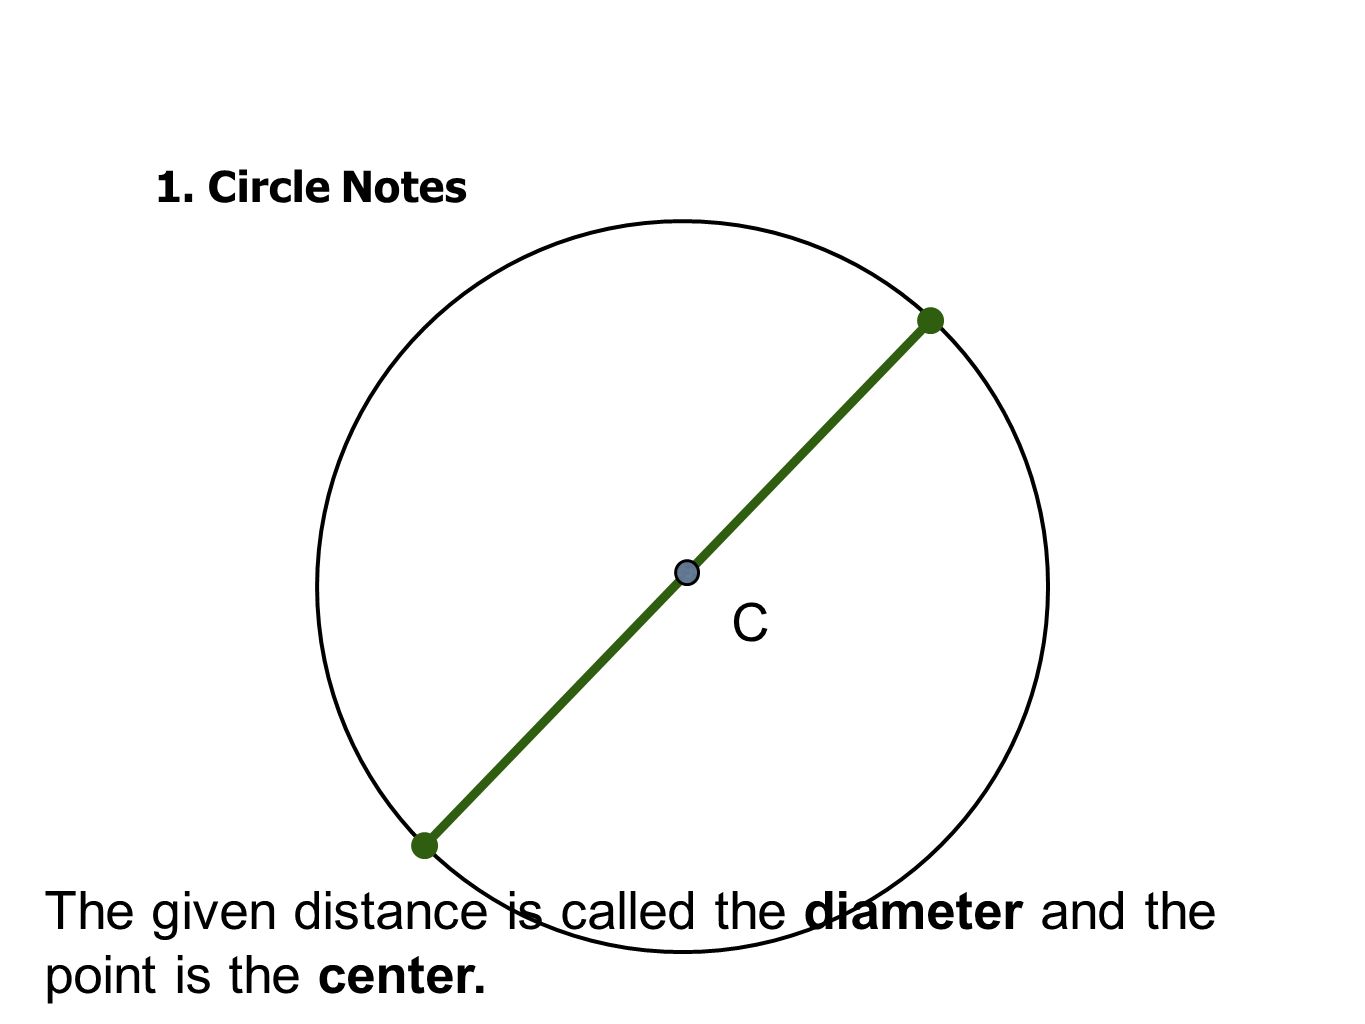 The given distance is called the diameter and the point is the center.